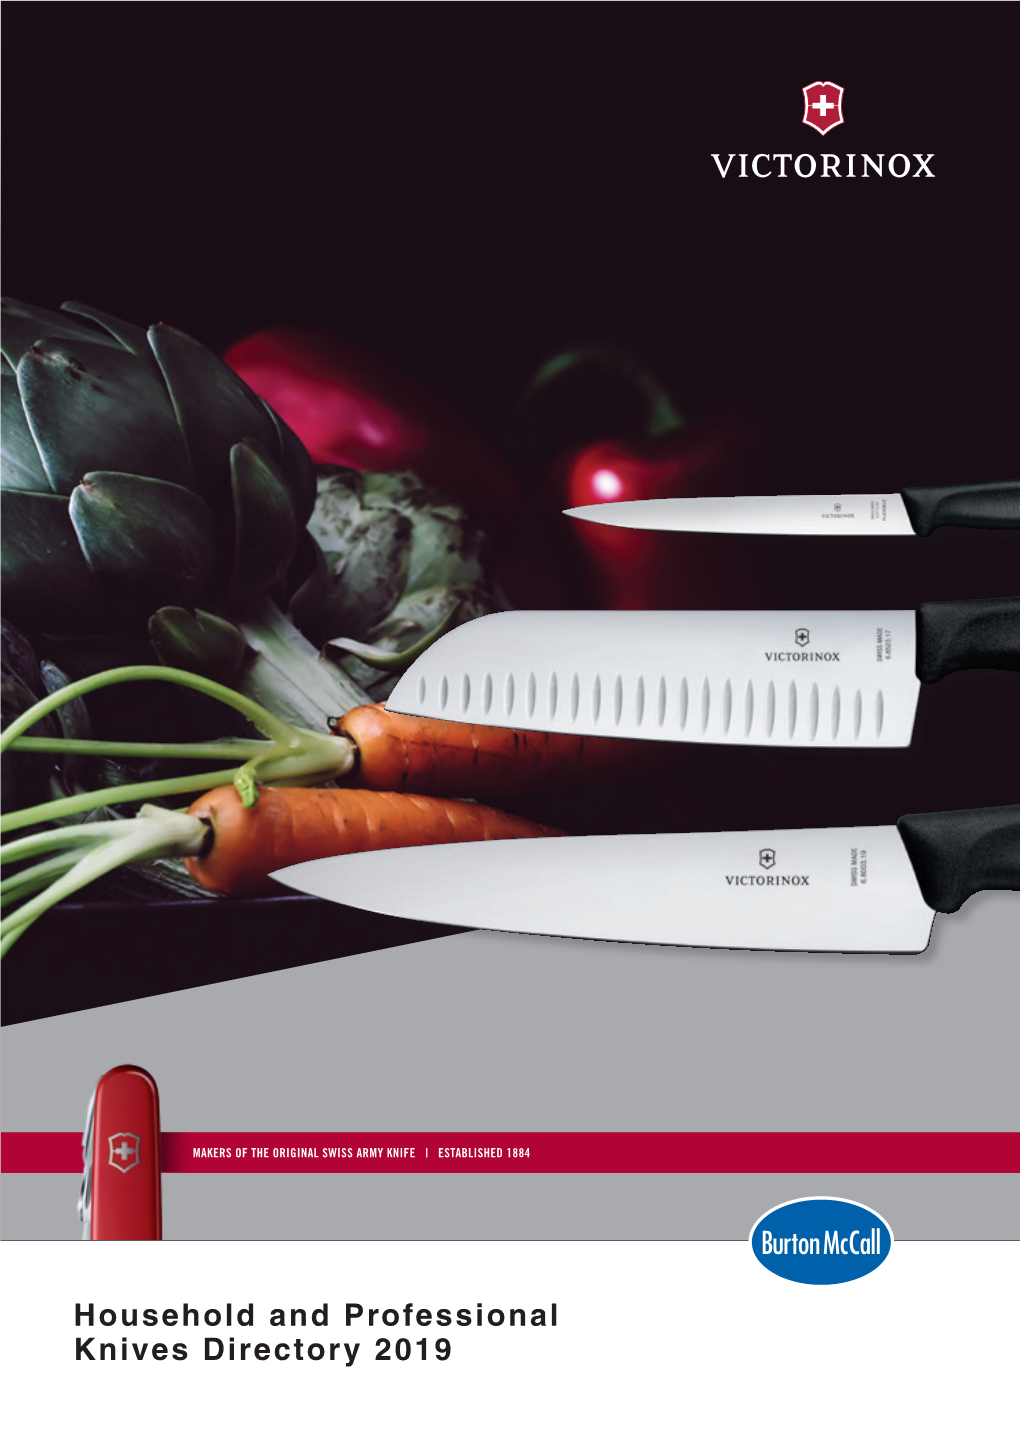 Household and Professional Knives Directory 2019